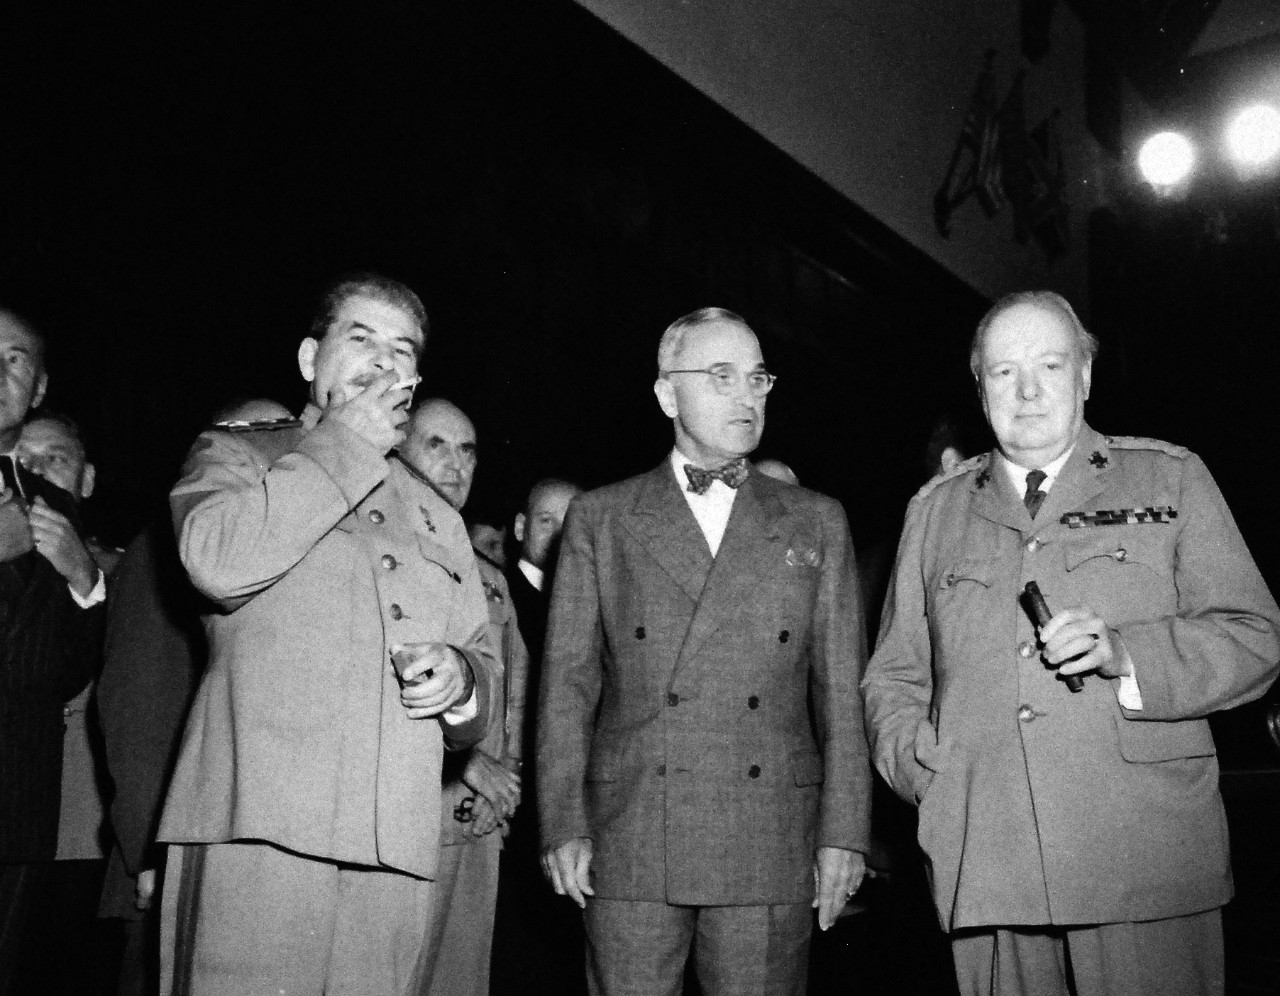 80-G-49961:  Potsdam Conference, July-August 1945.   The “Big Three” in conference room at Potsdam, Germany, just before start of the first session.   Shown: Premier Joseph Stalin, President Harry S. Truman, and Prime Minister Winston Churchill.   Photograph received July 18, 1945.  Official U.S. Navy Photograph, now in the collections of the National Archives.  (2016/02/23).